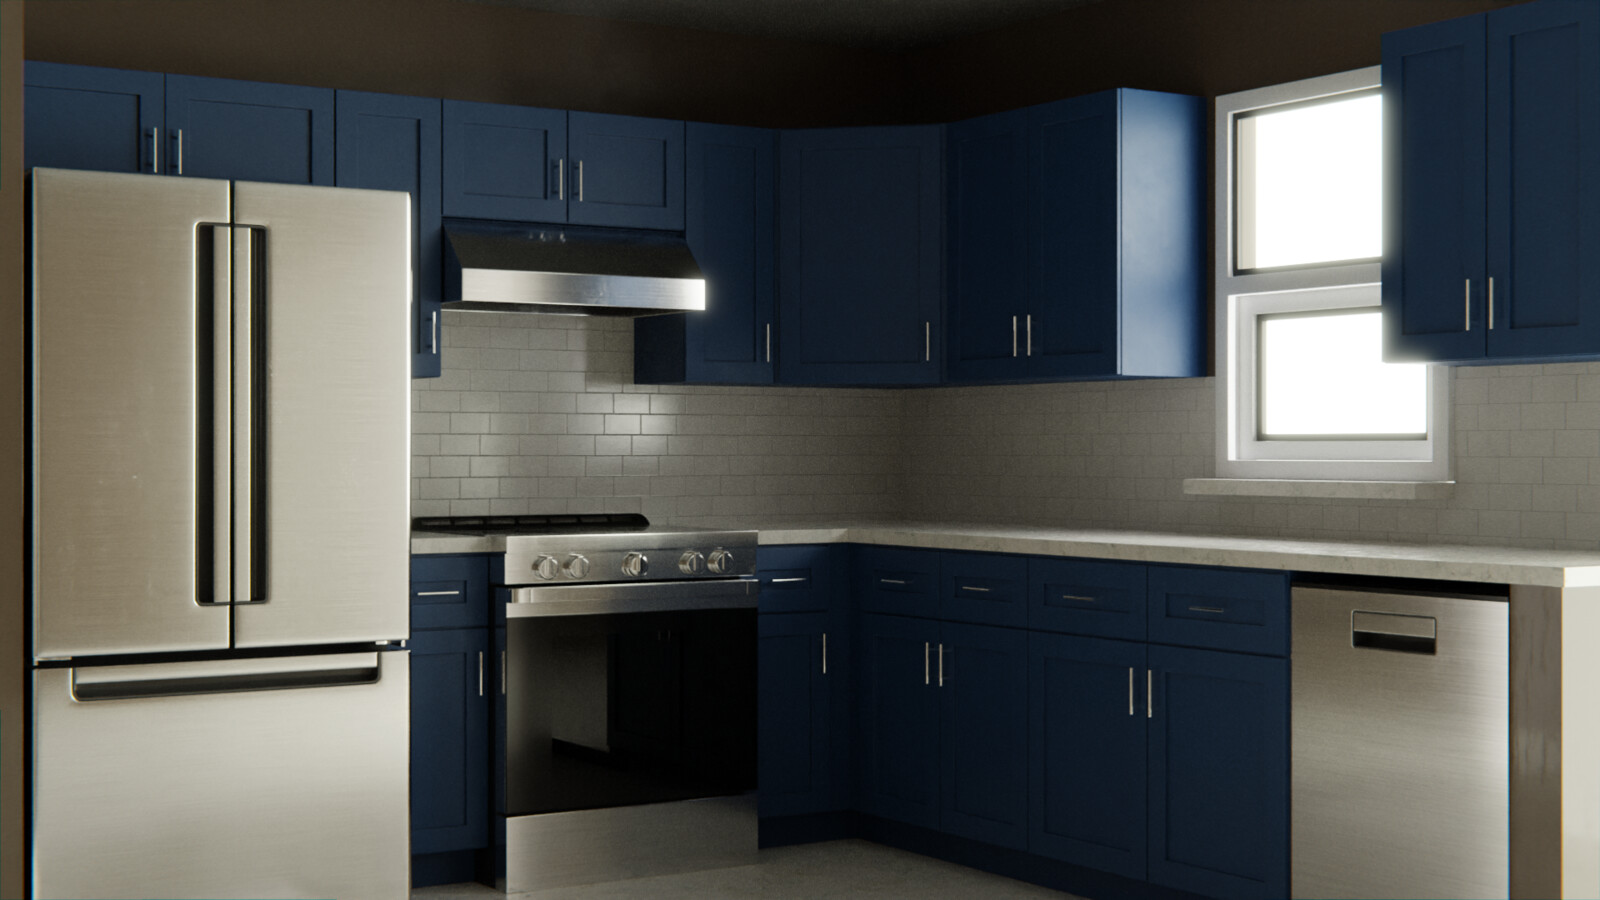 Create Modular Kitchen Cabinets with Blender